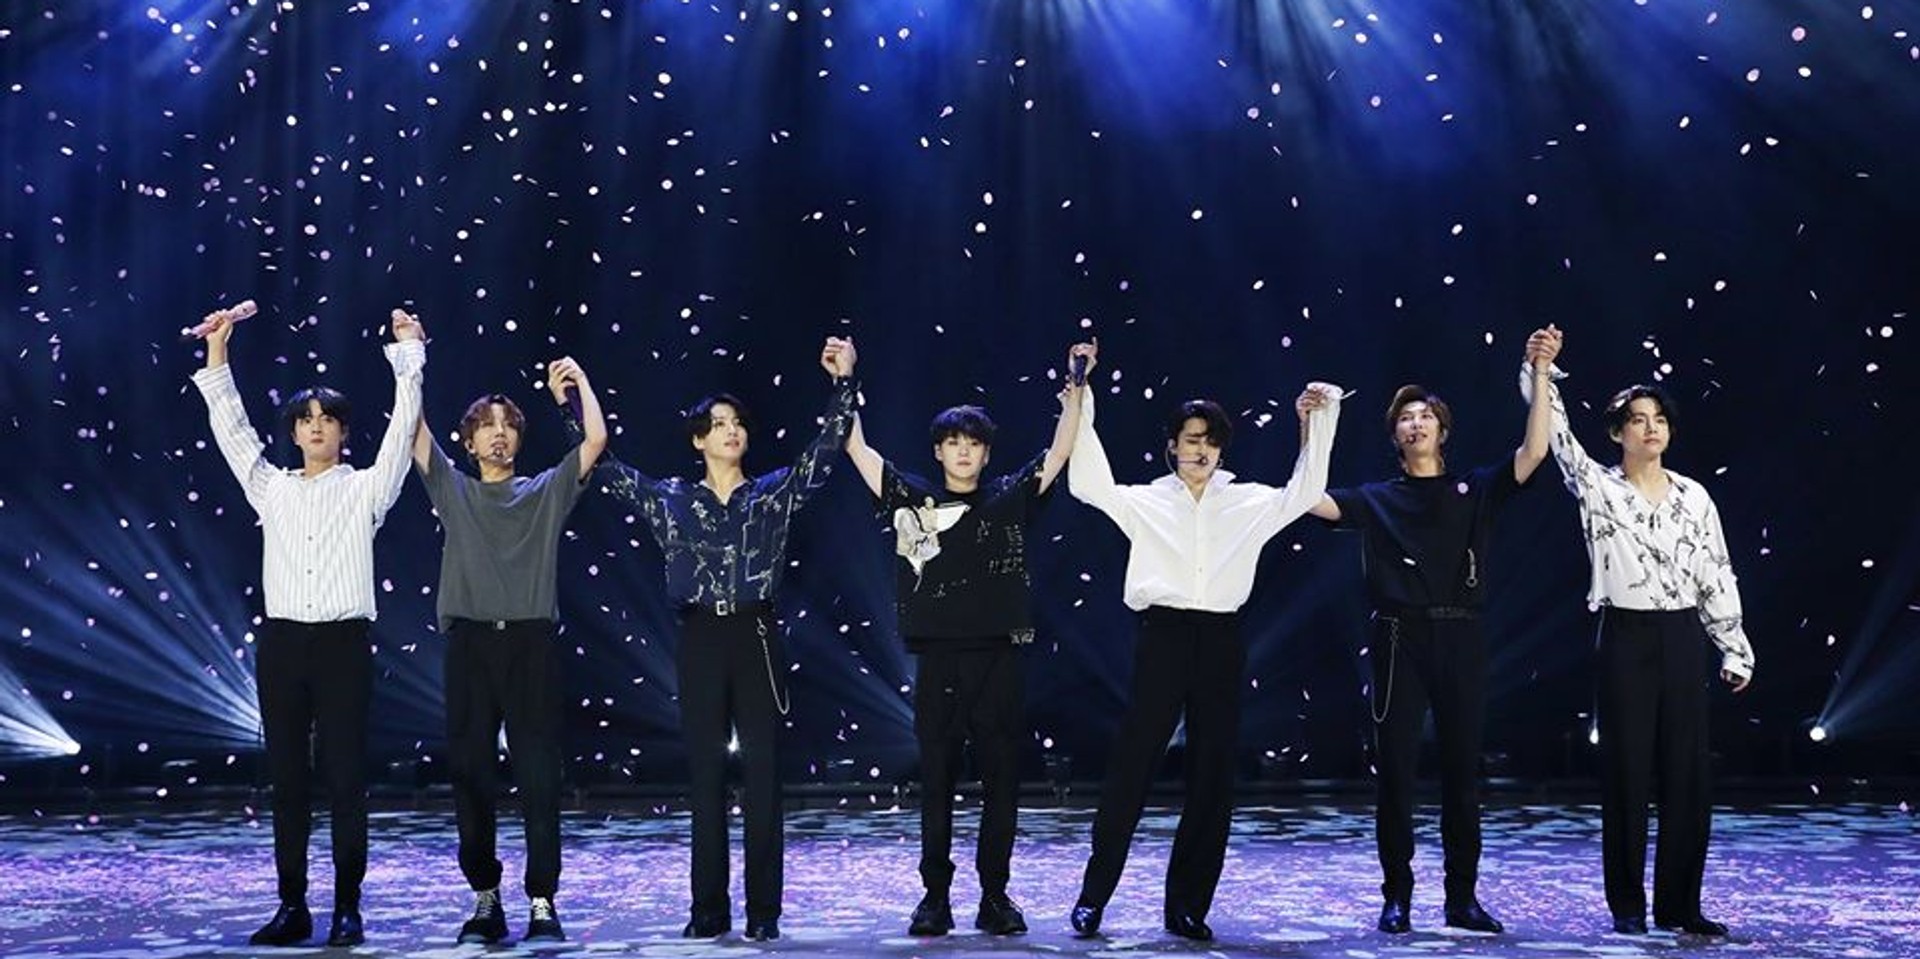 BTS breaks the record for the largest paid virtual concert, earning close to $20 million in 1 show